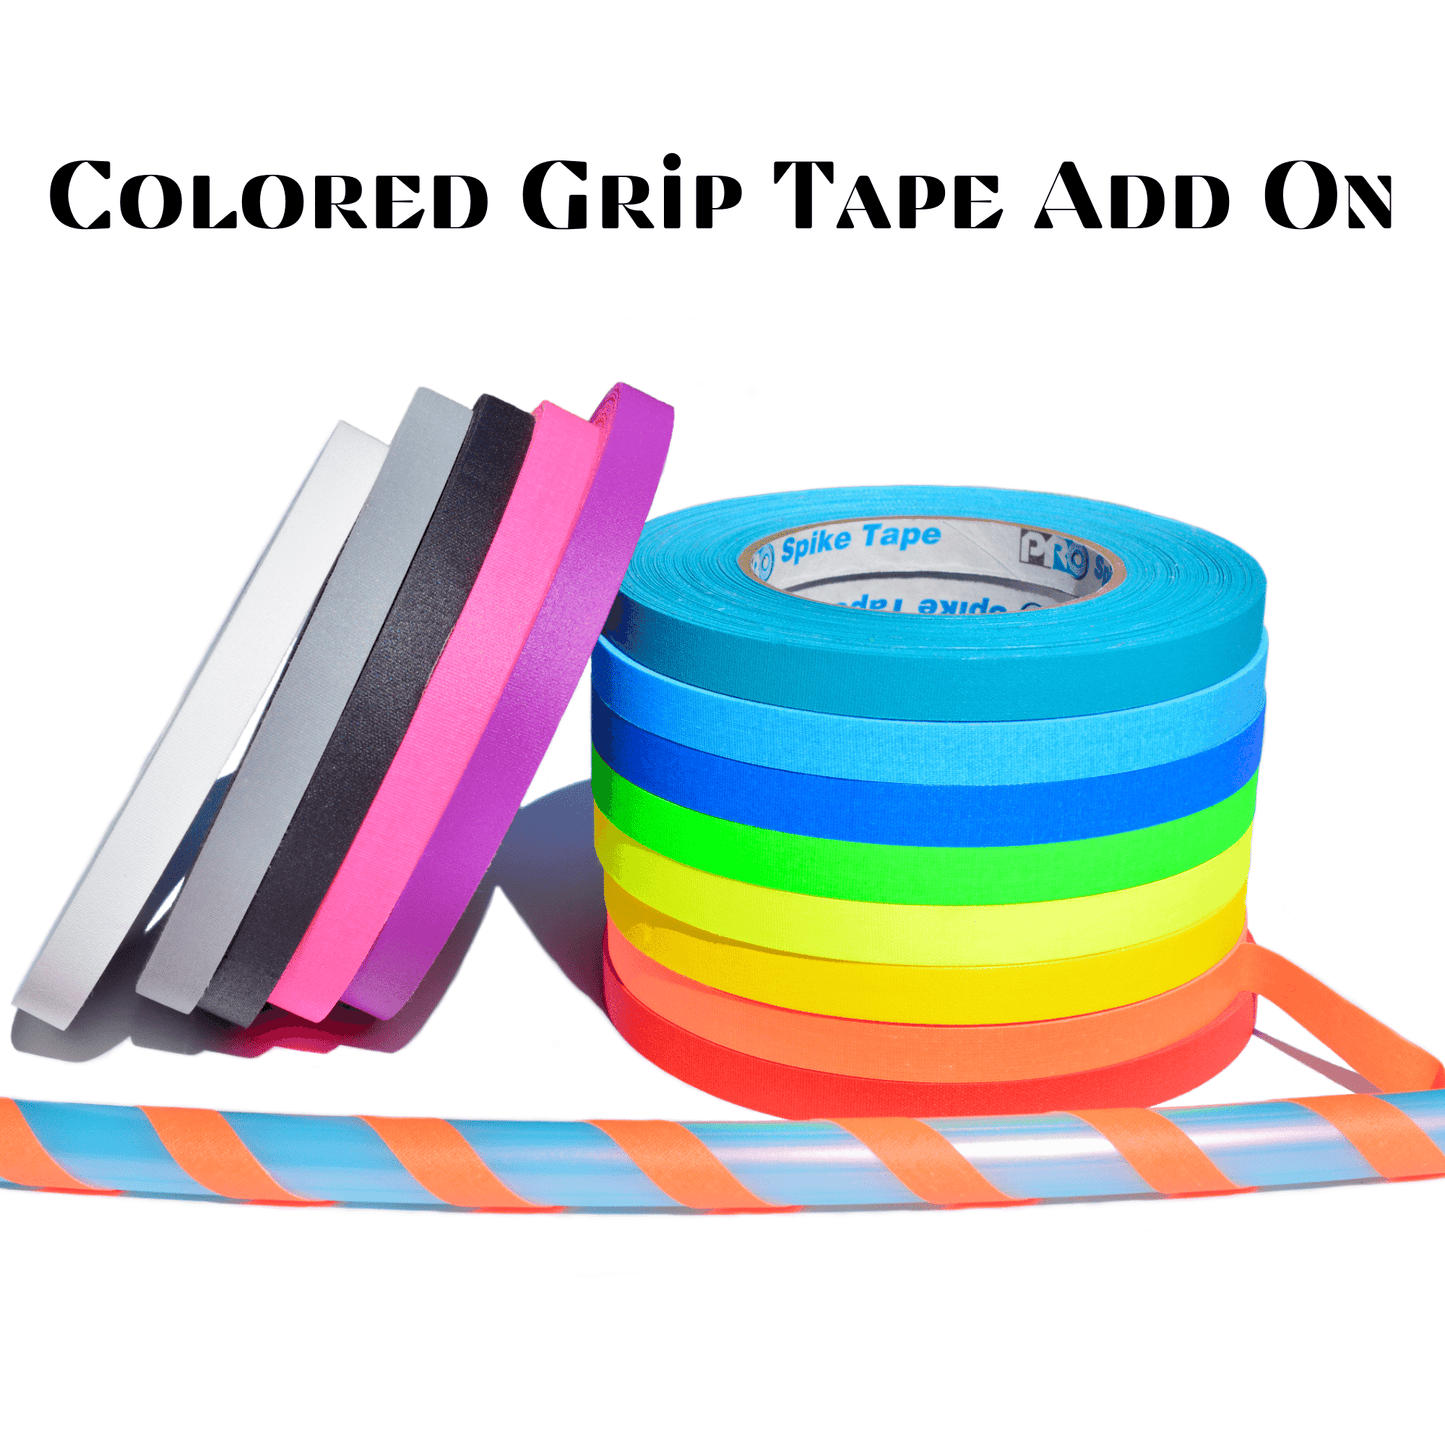 ADD ON: Colored Grip Tape